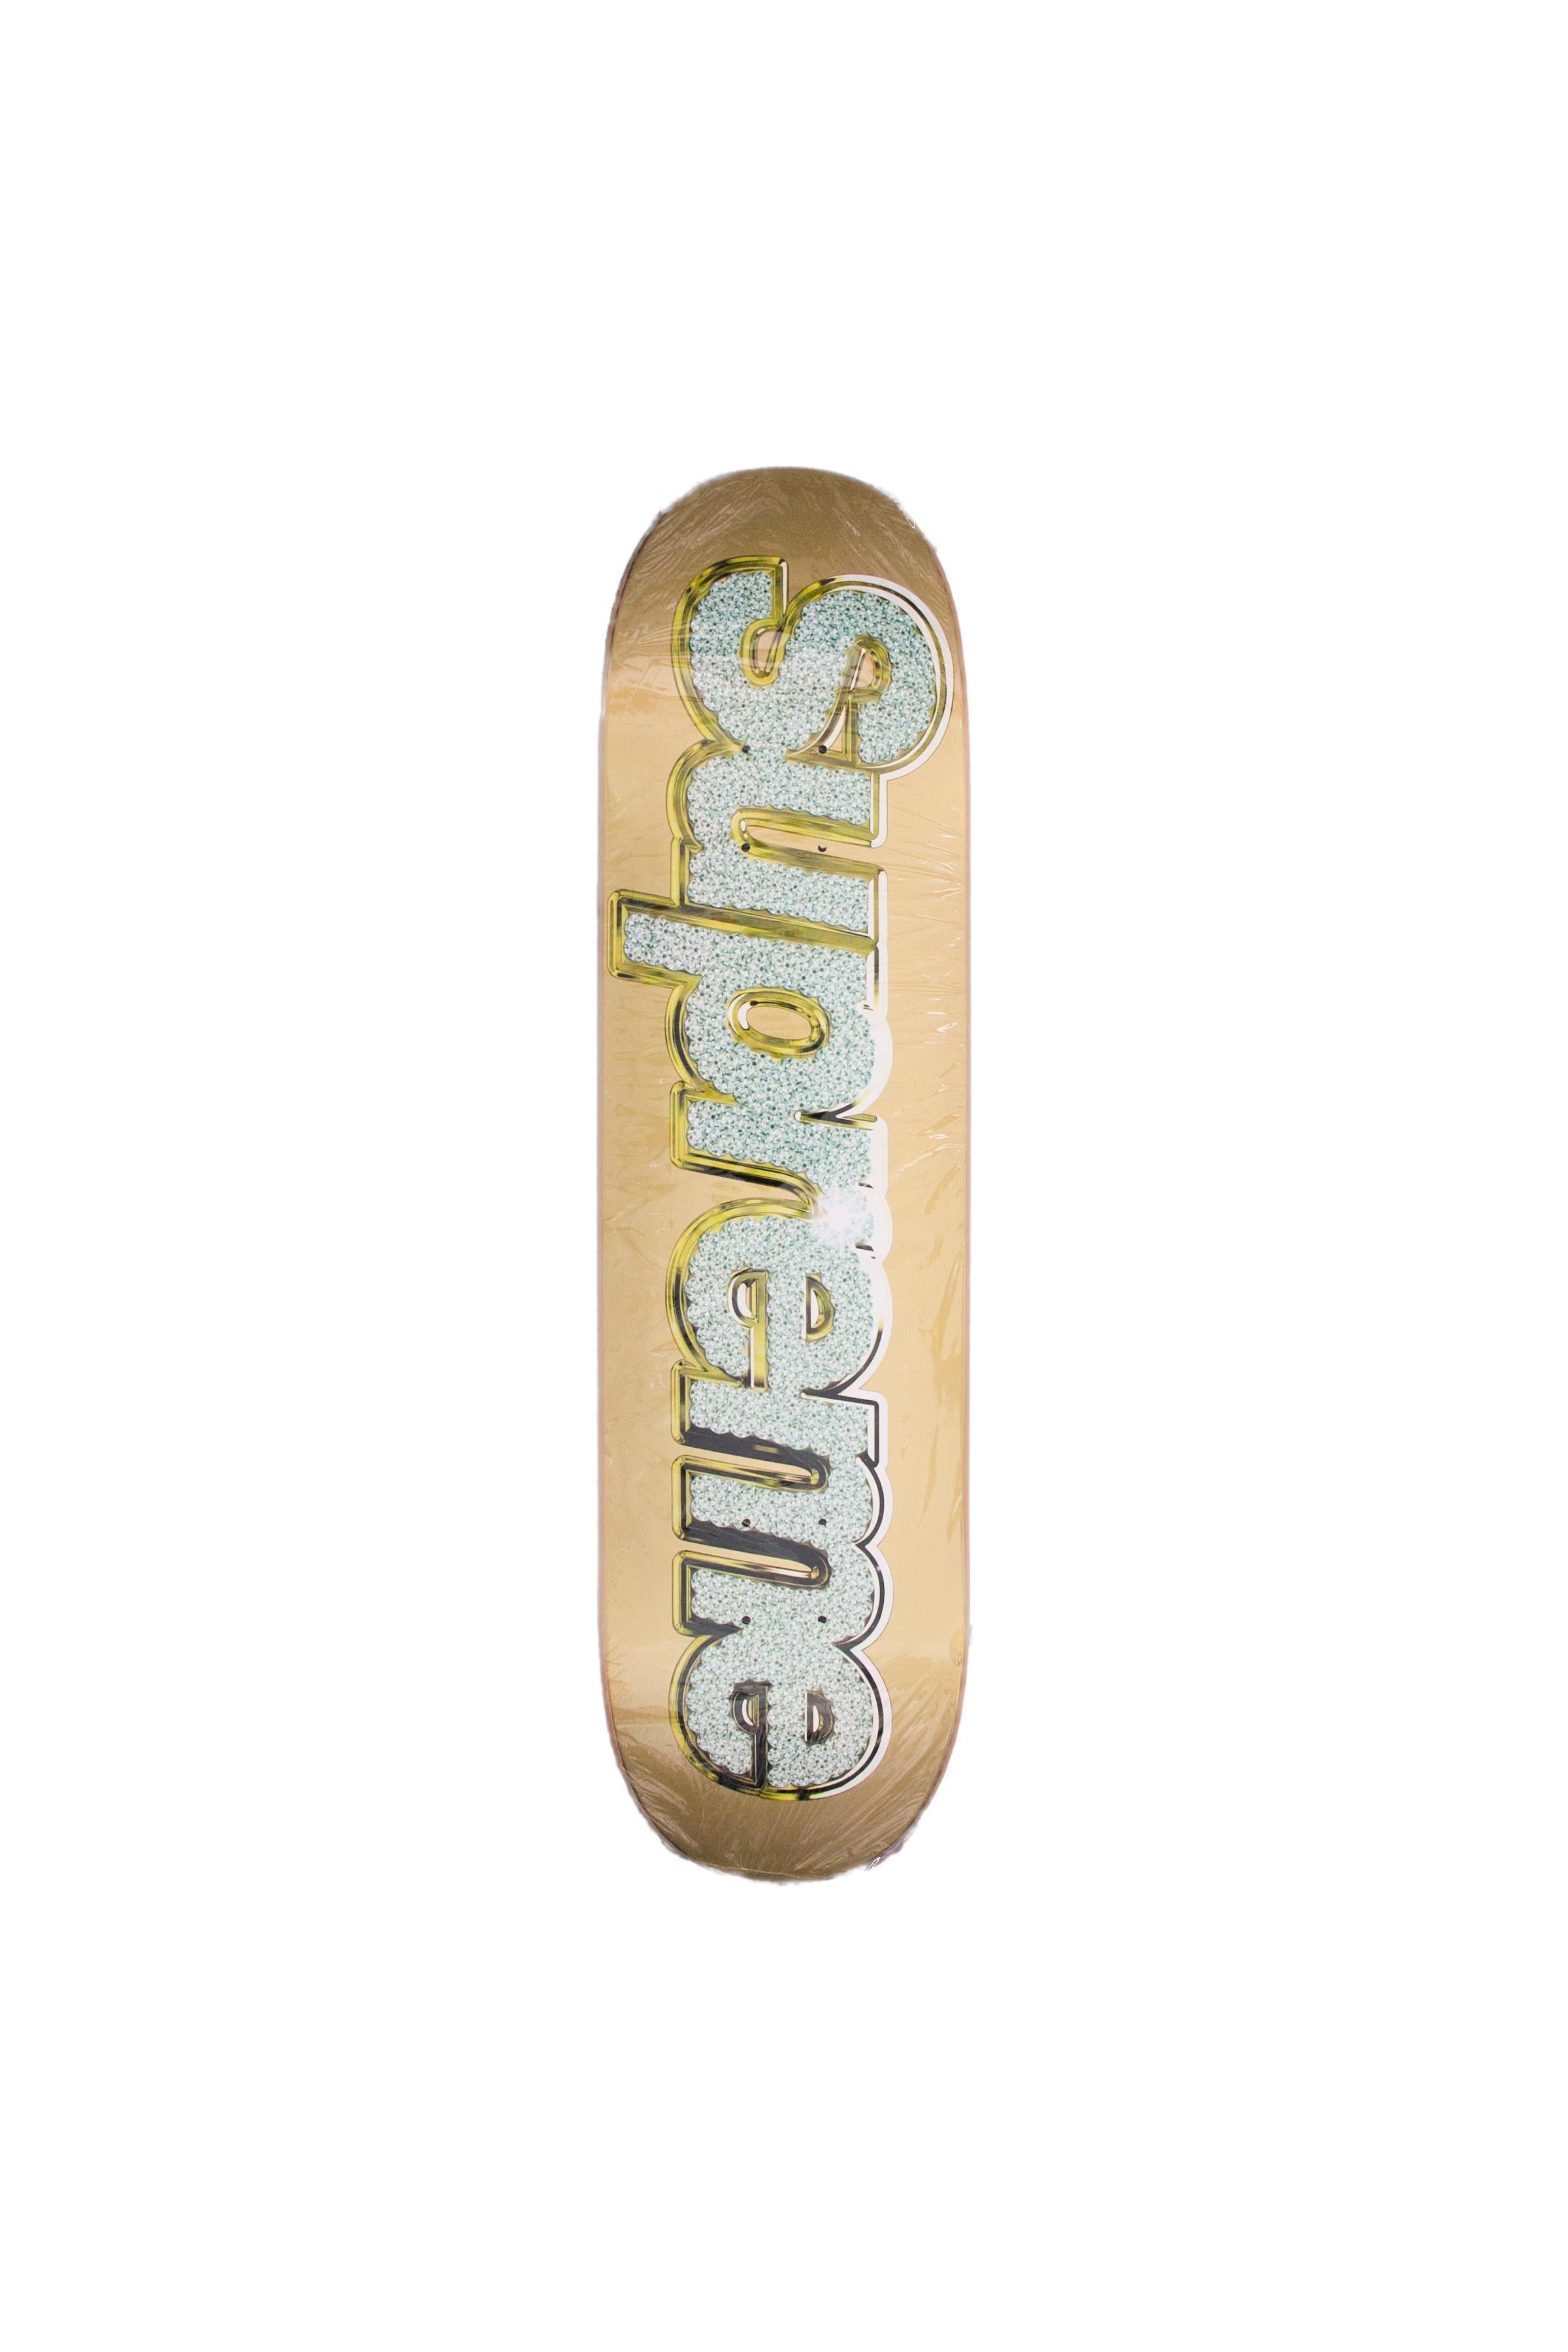 Rare Supreme Bling Gold Skatedeck in Gold. Extremely rare deck, new in packaging.
